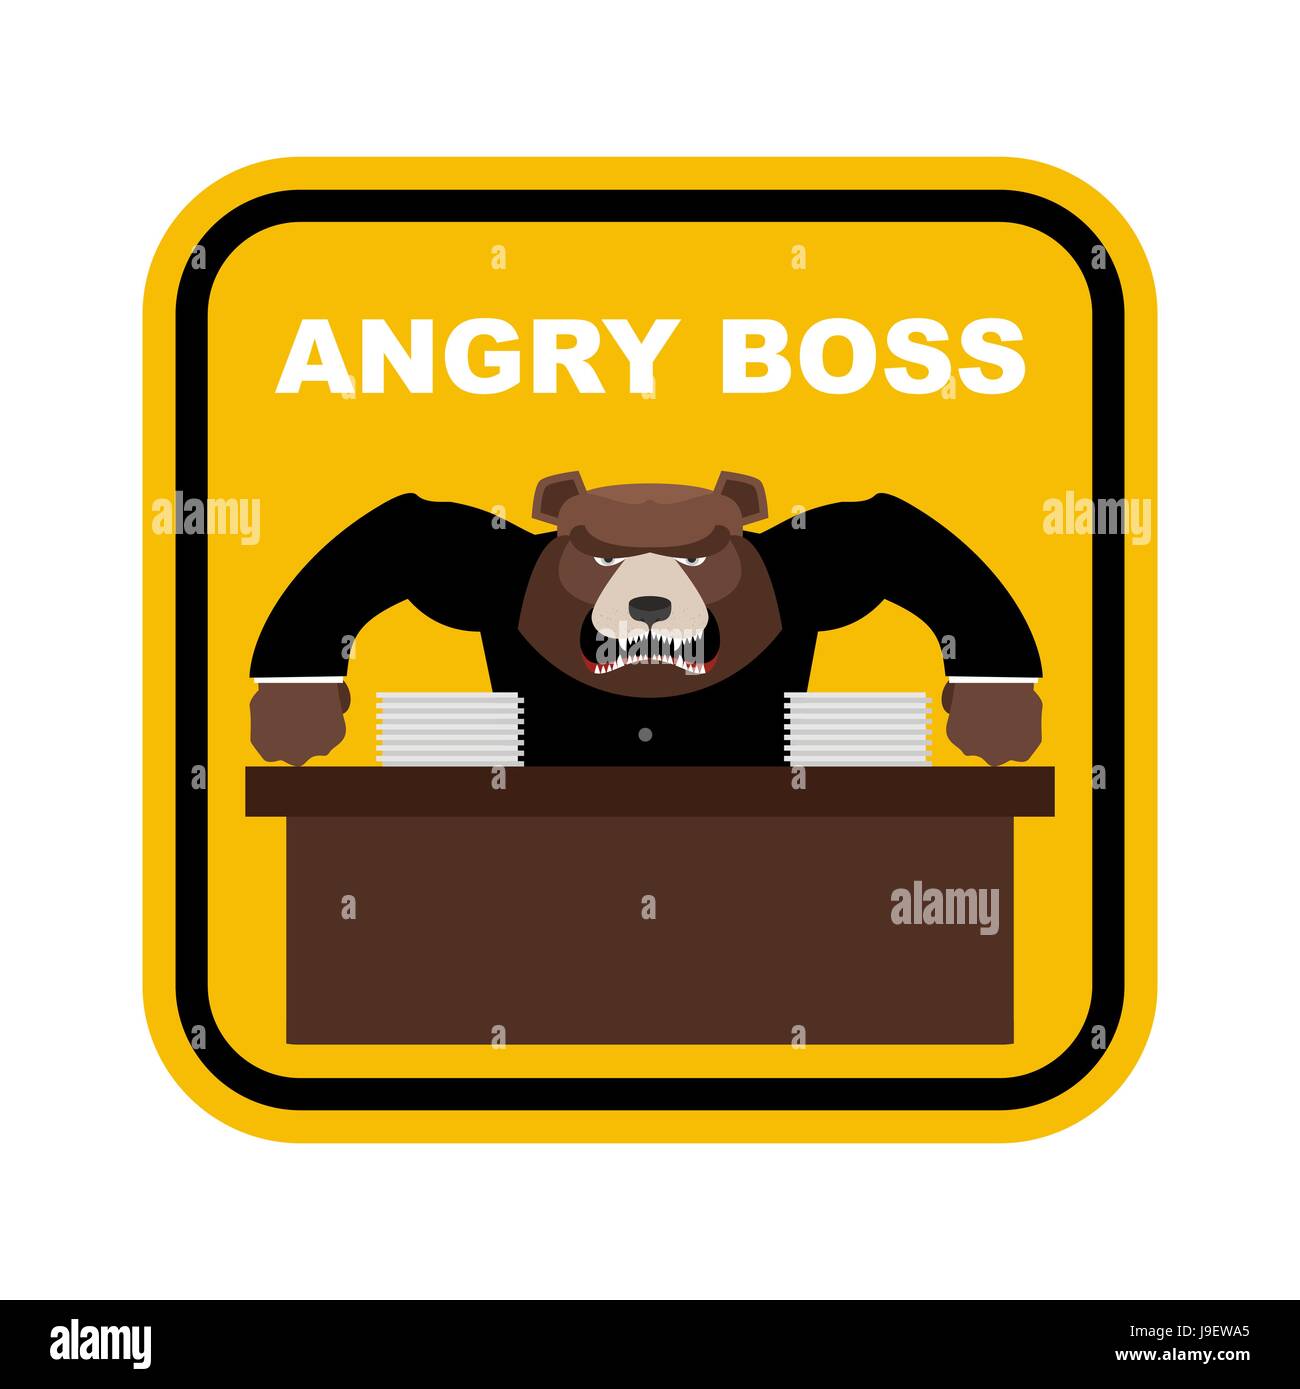 Scary bear boss. Angry boss. Sticker fo Office. Yellow sign danger. Vector illustration Stock Vector